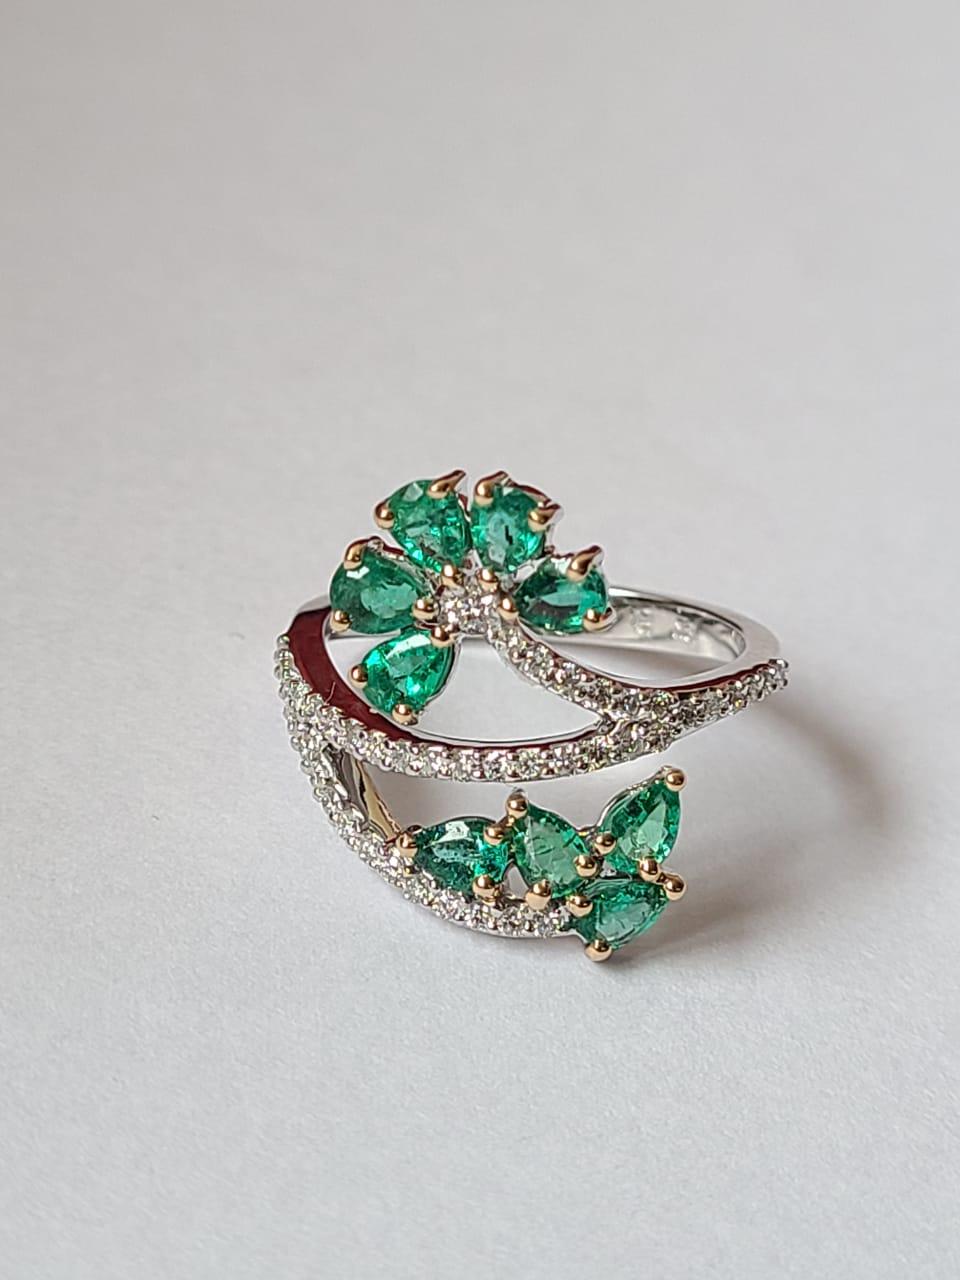 Modern Set in 18K Gold, 1.13 Carats, Natural Zambian Emerald & Diamonds Cocktail Ring For Sale